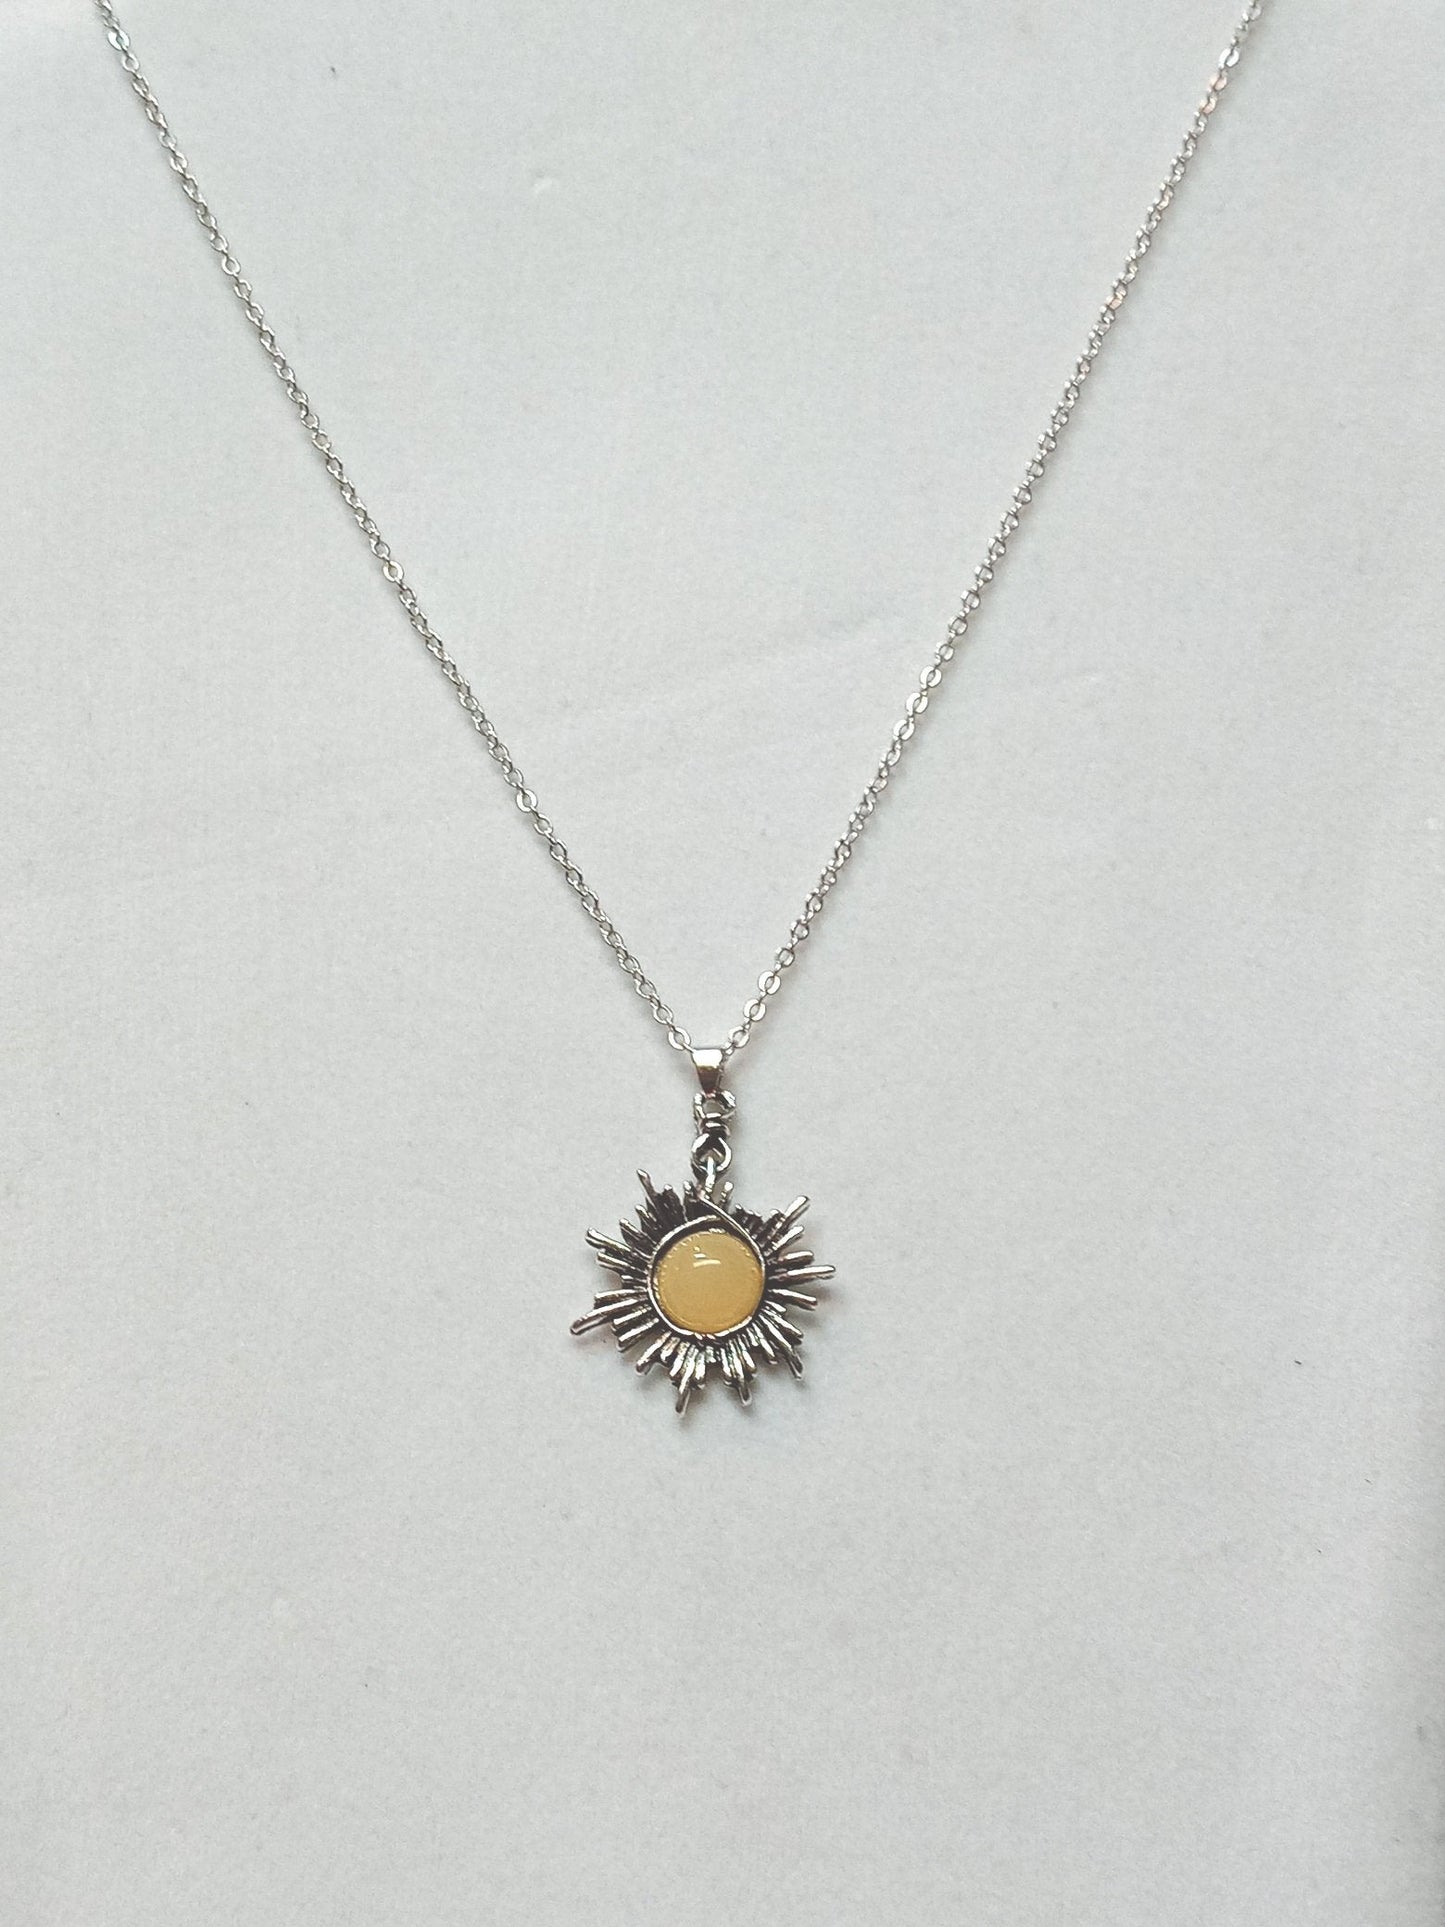 Vintage Moon on Silver Chain Necklace